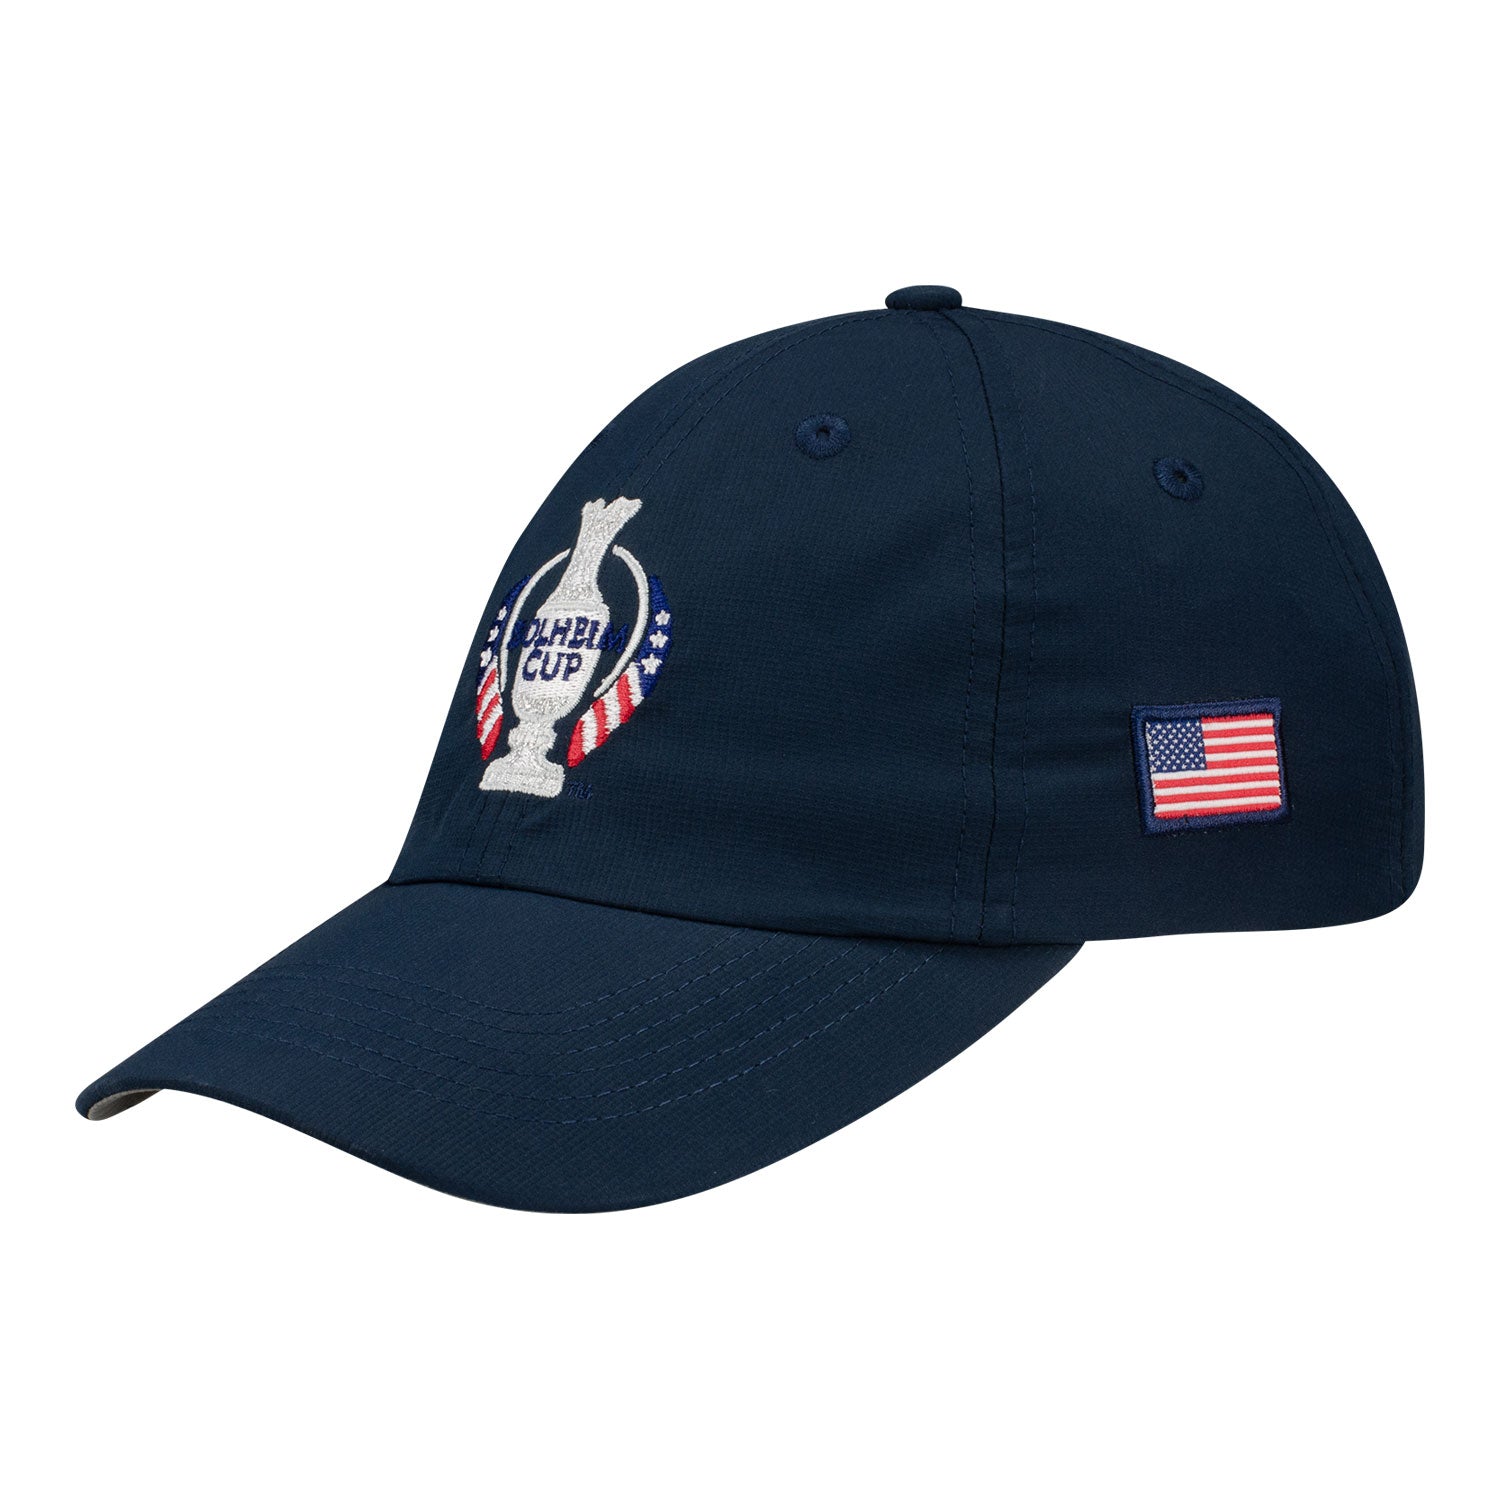 Imperial LPGA Official Solheim Cup Fan Wear in Navy - Angled Left Side View